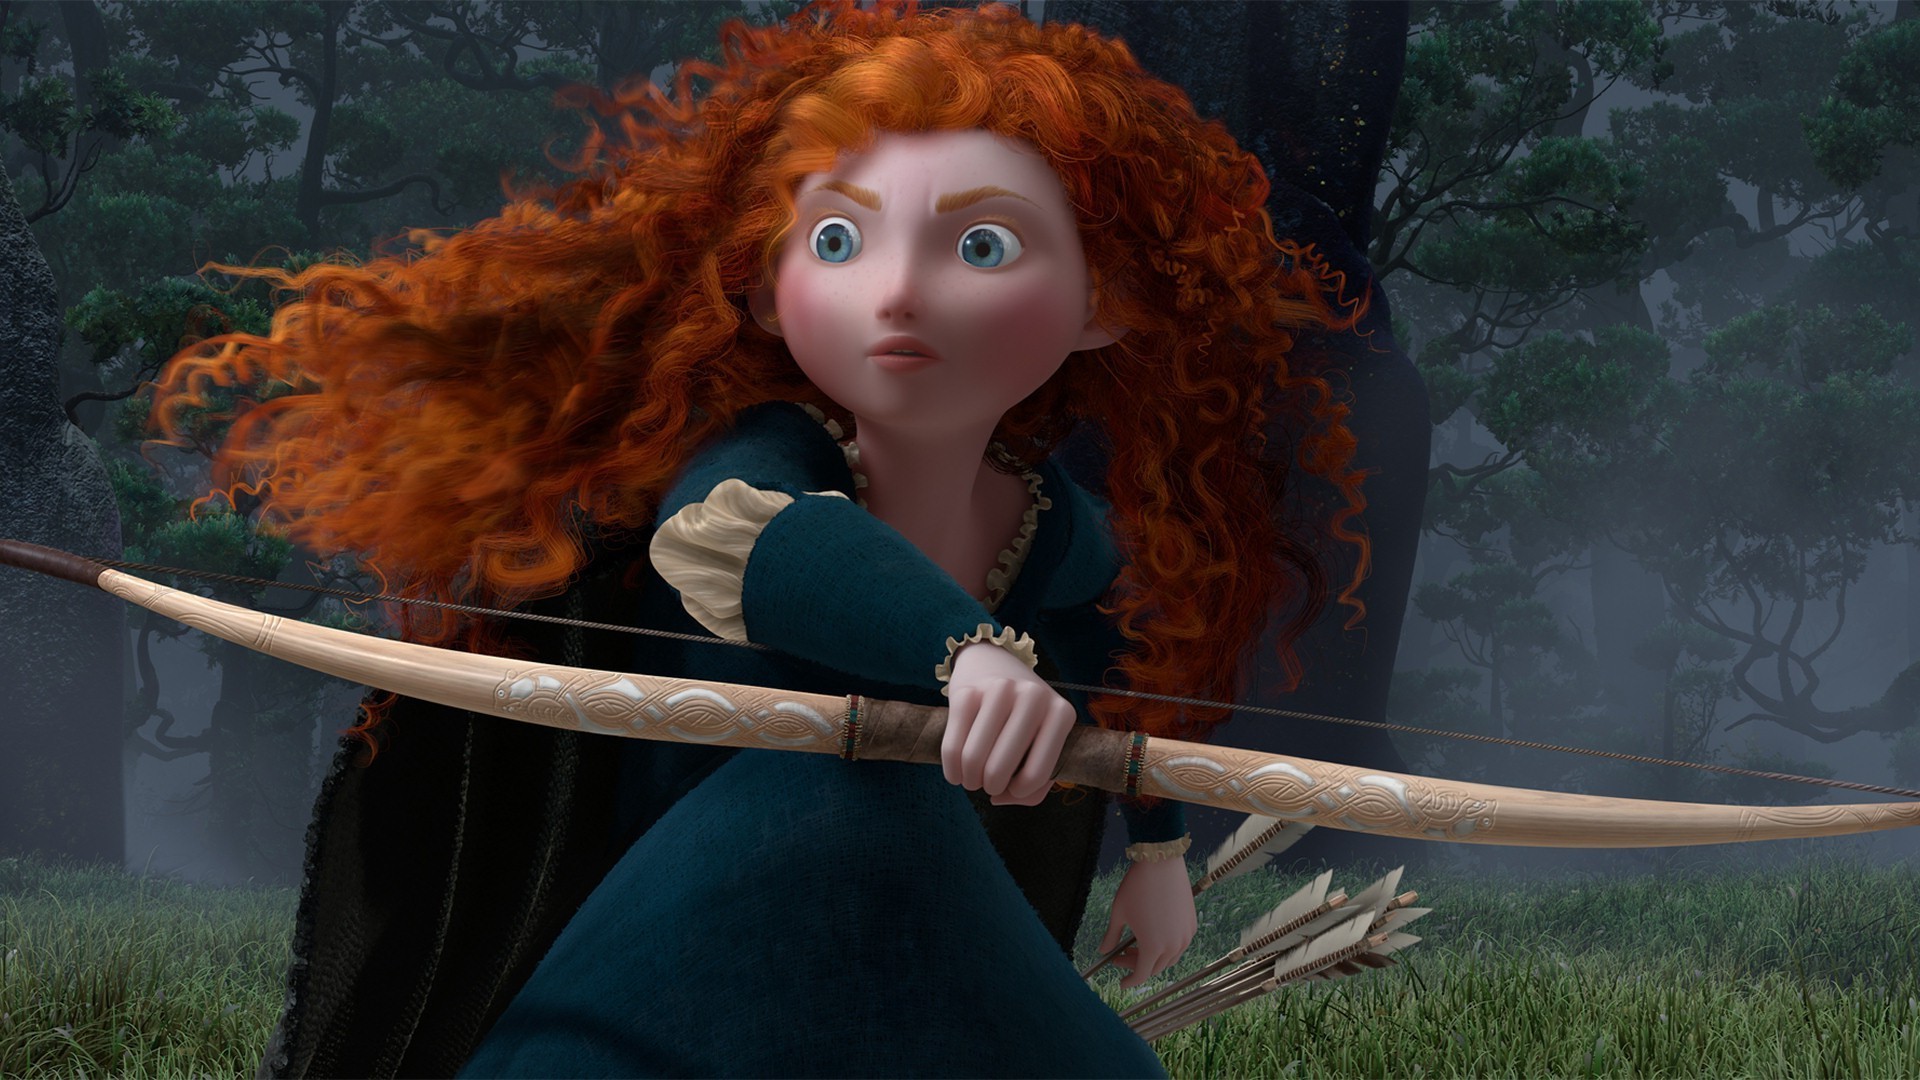  movies  Brave  Disney Wallpapers HD Desktop and Mobile  